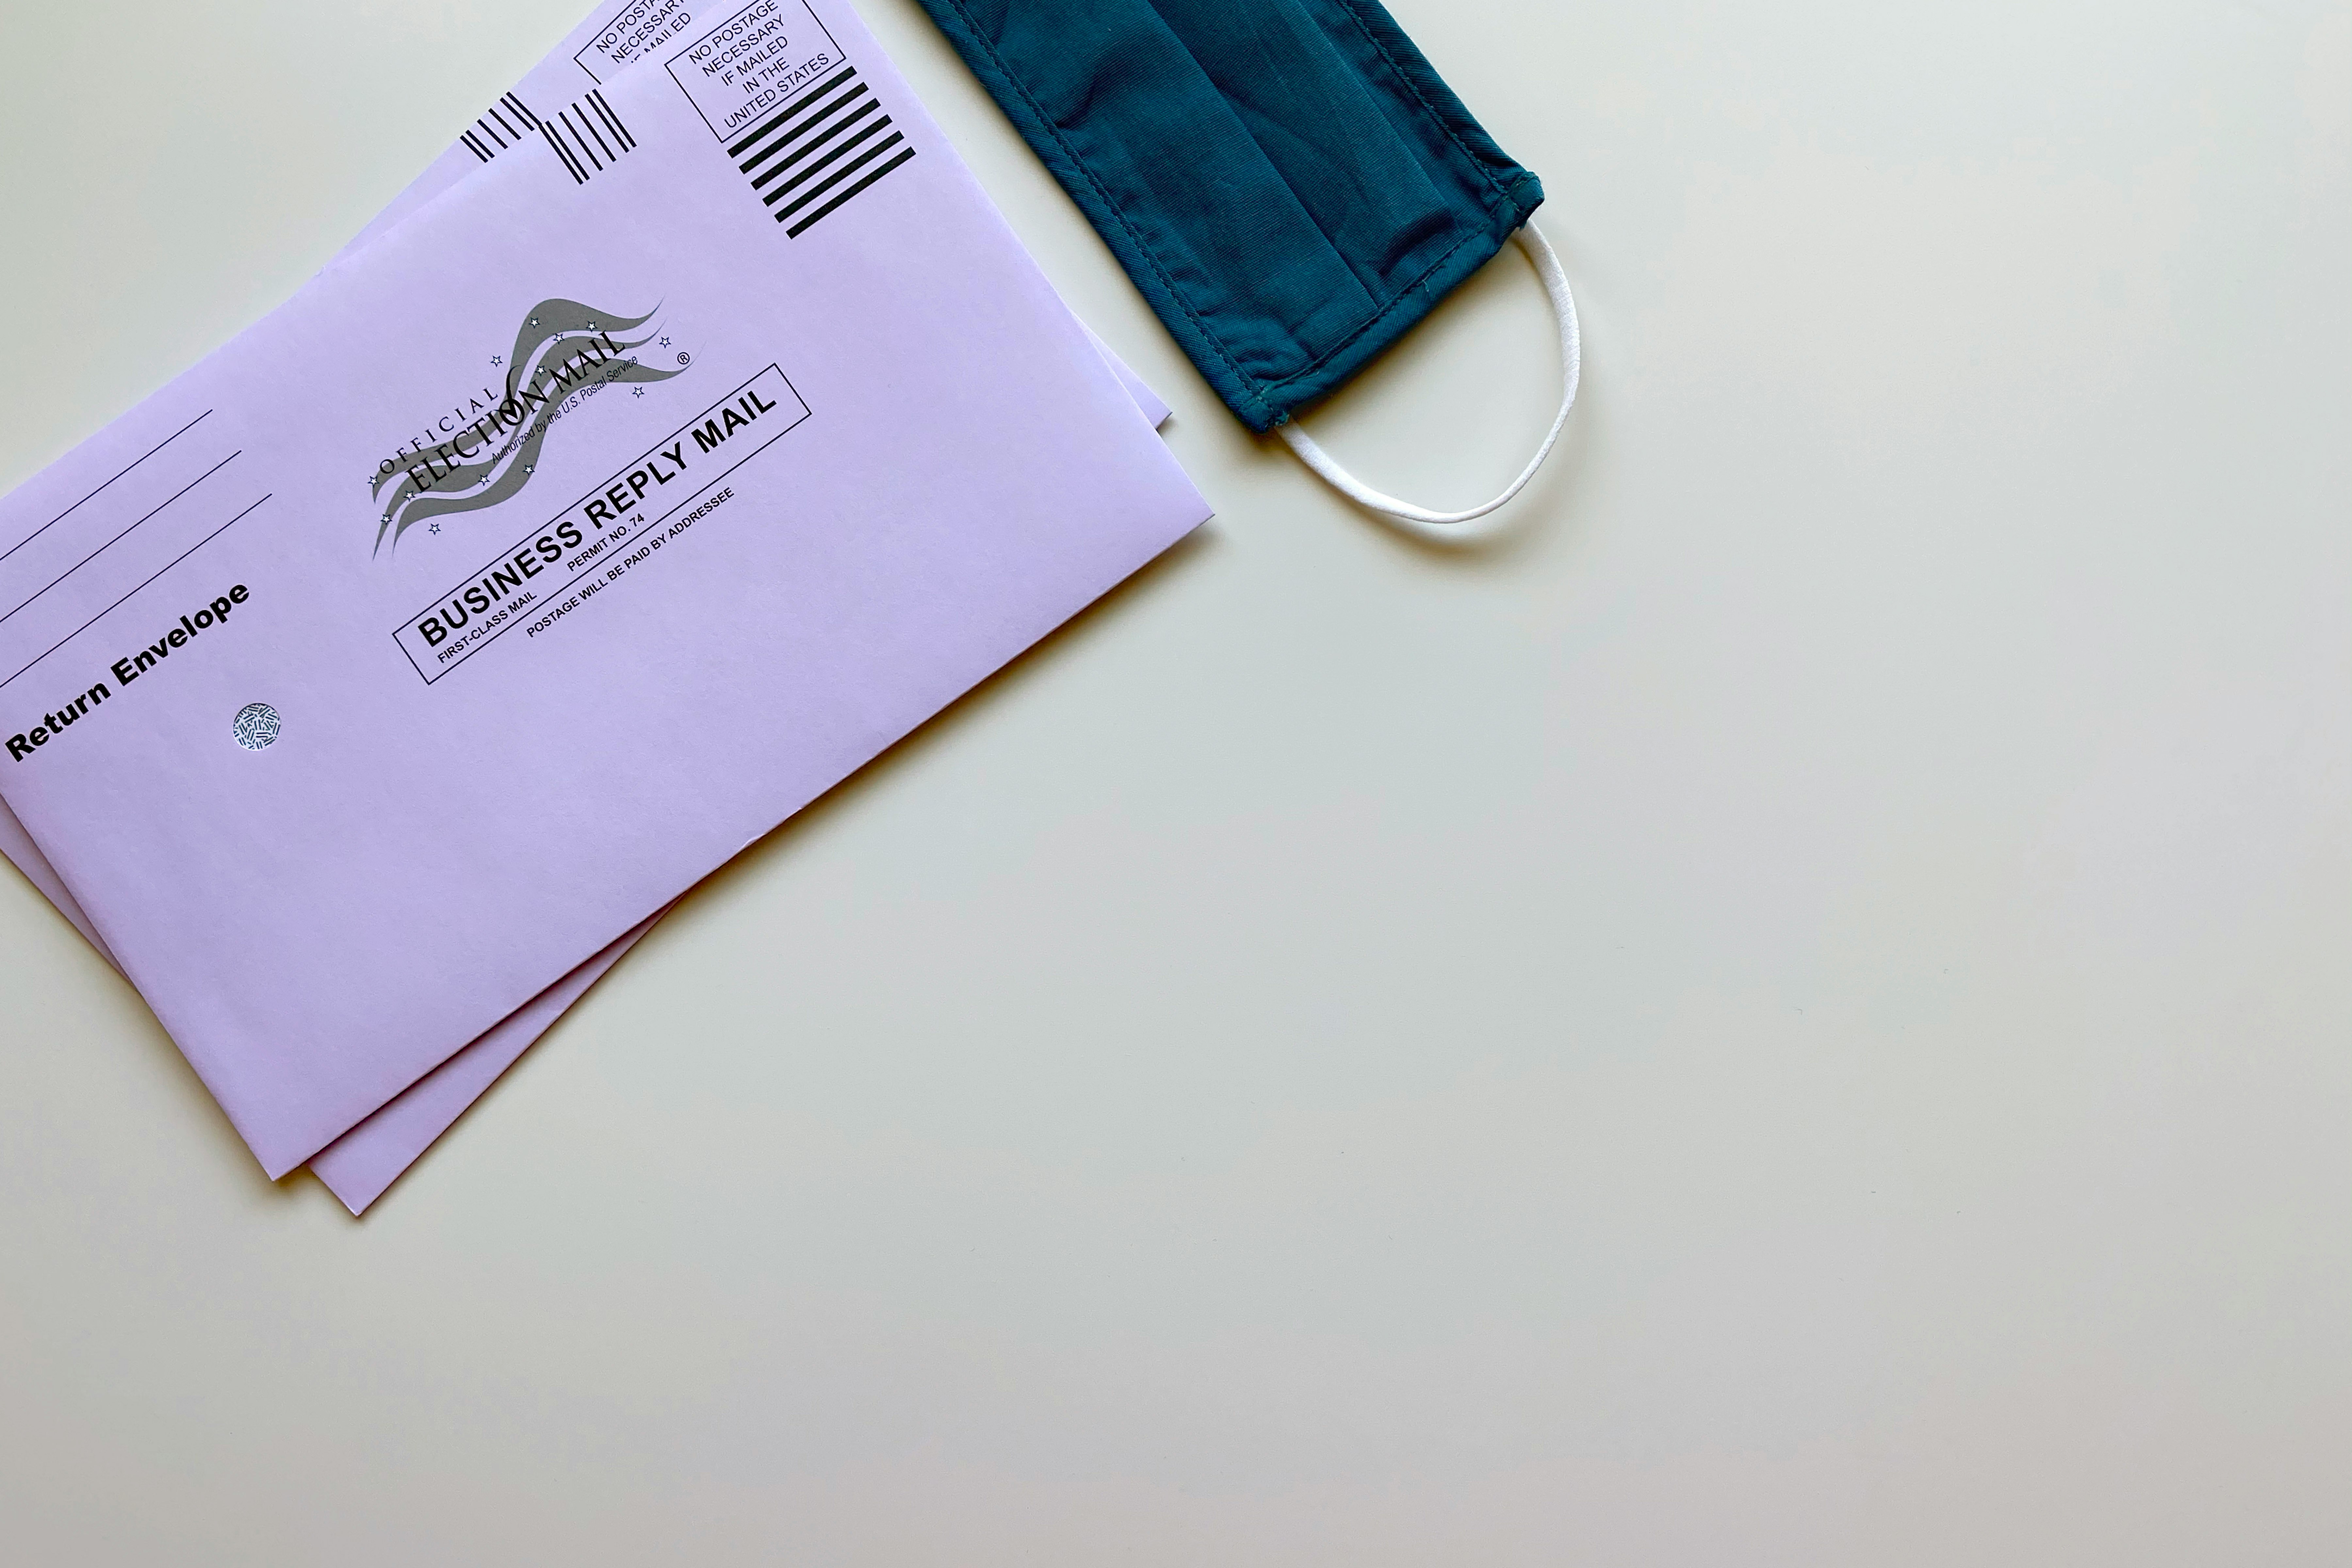 American election mail envelopes with face mask